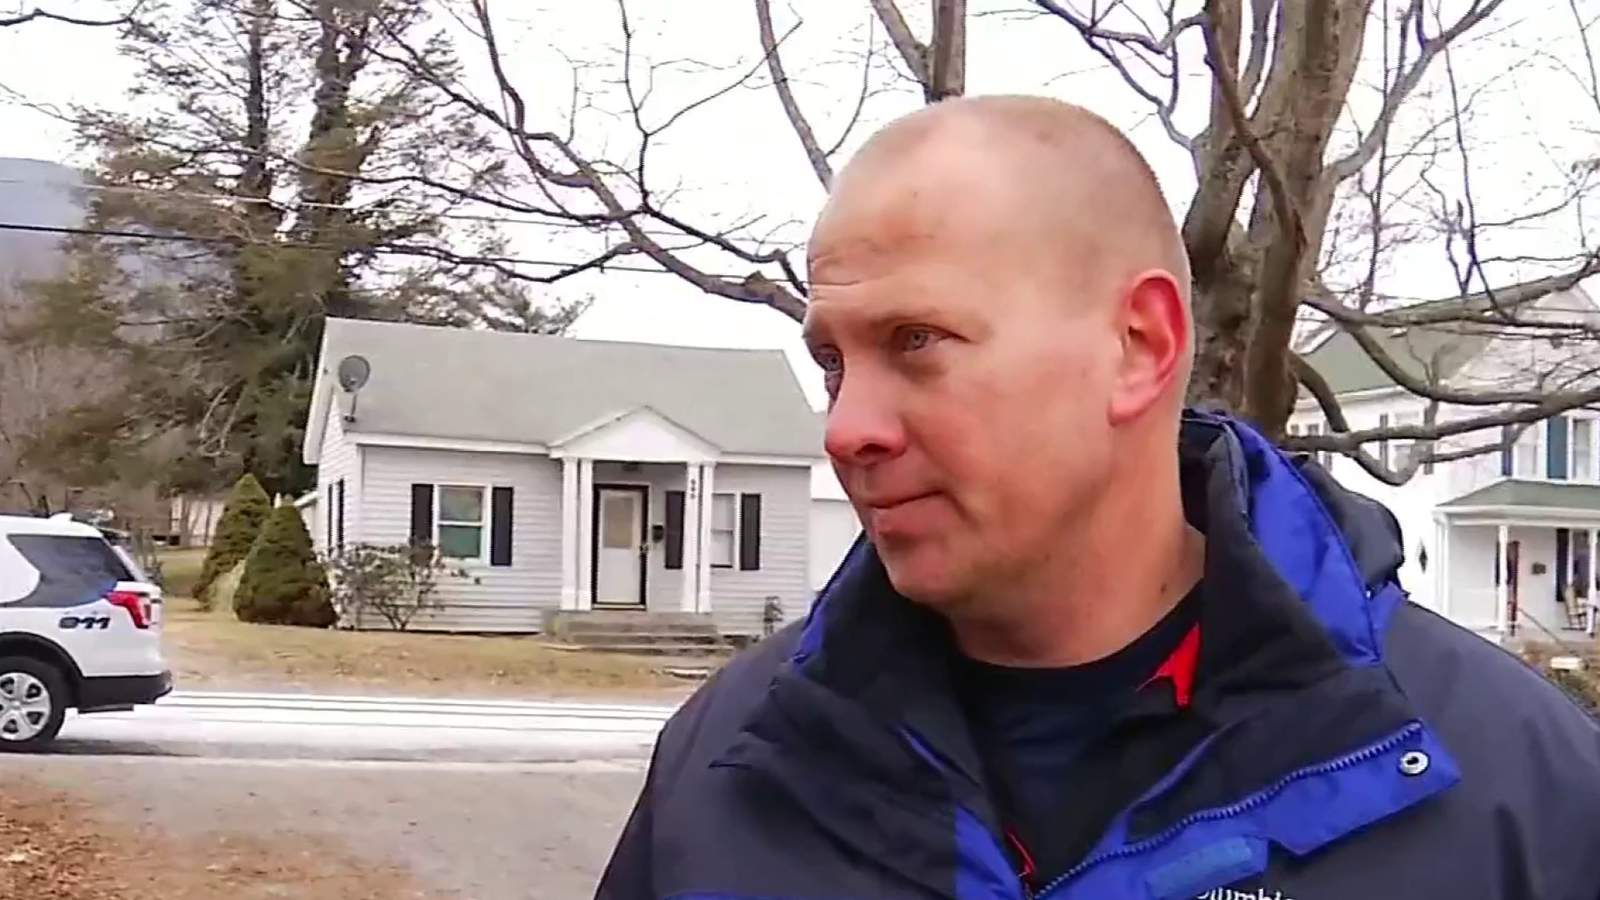 Pearisburg police officer helps struggling family during their time of need